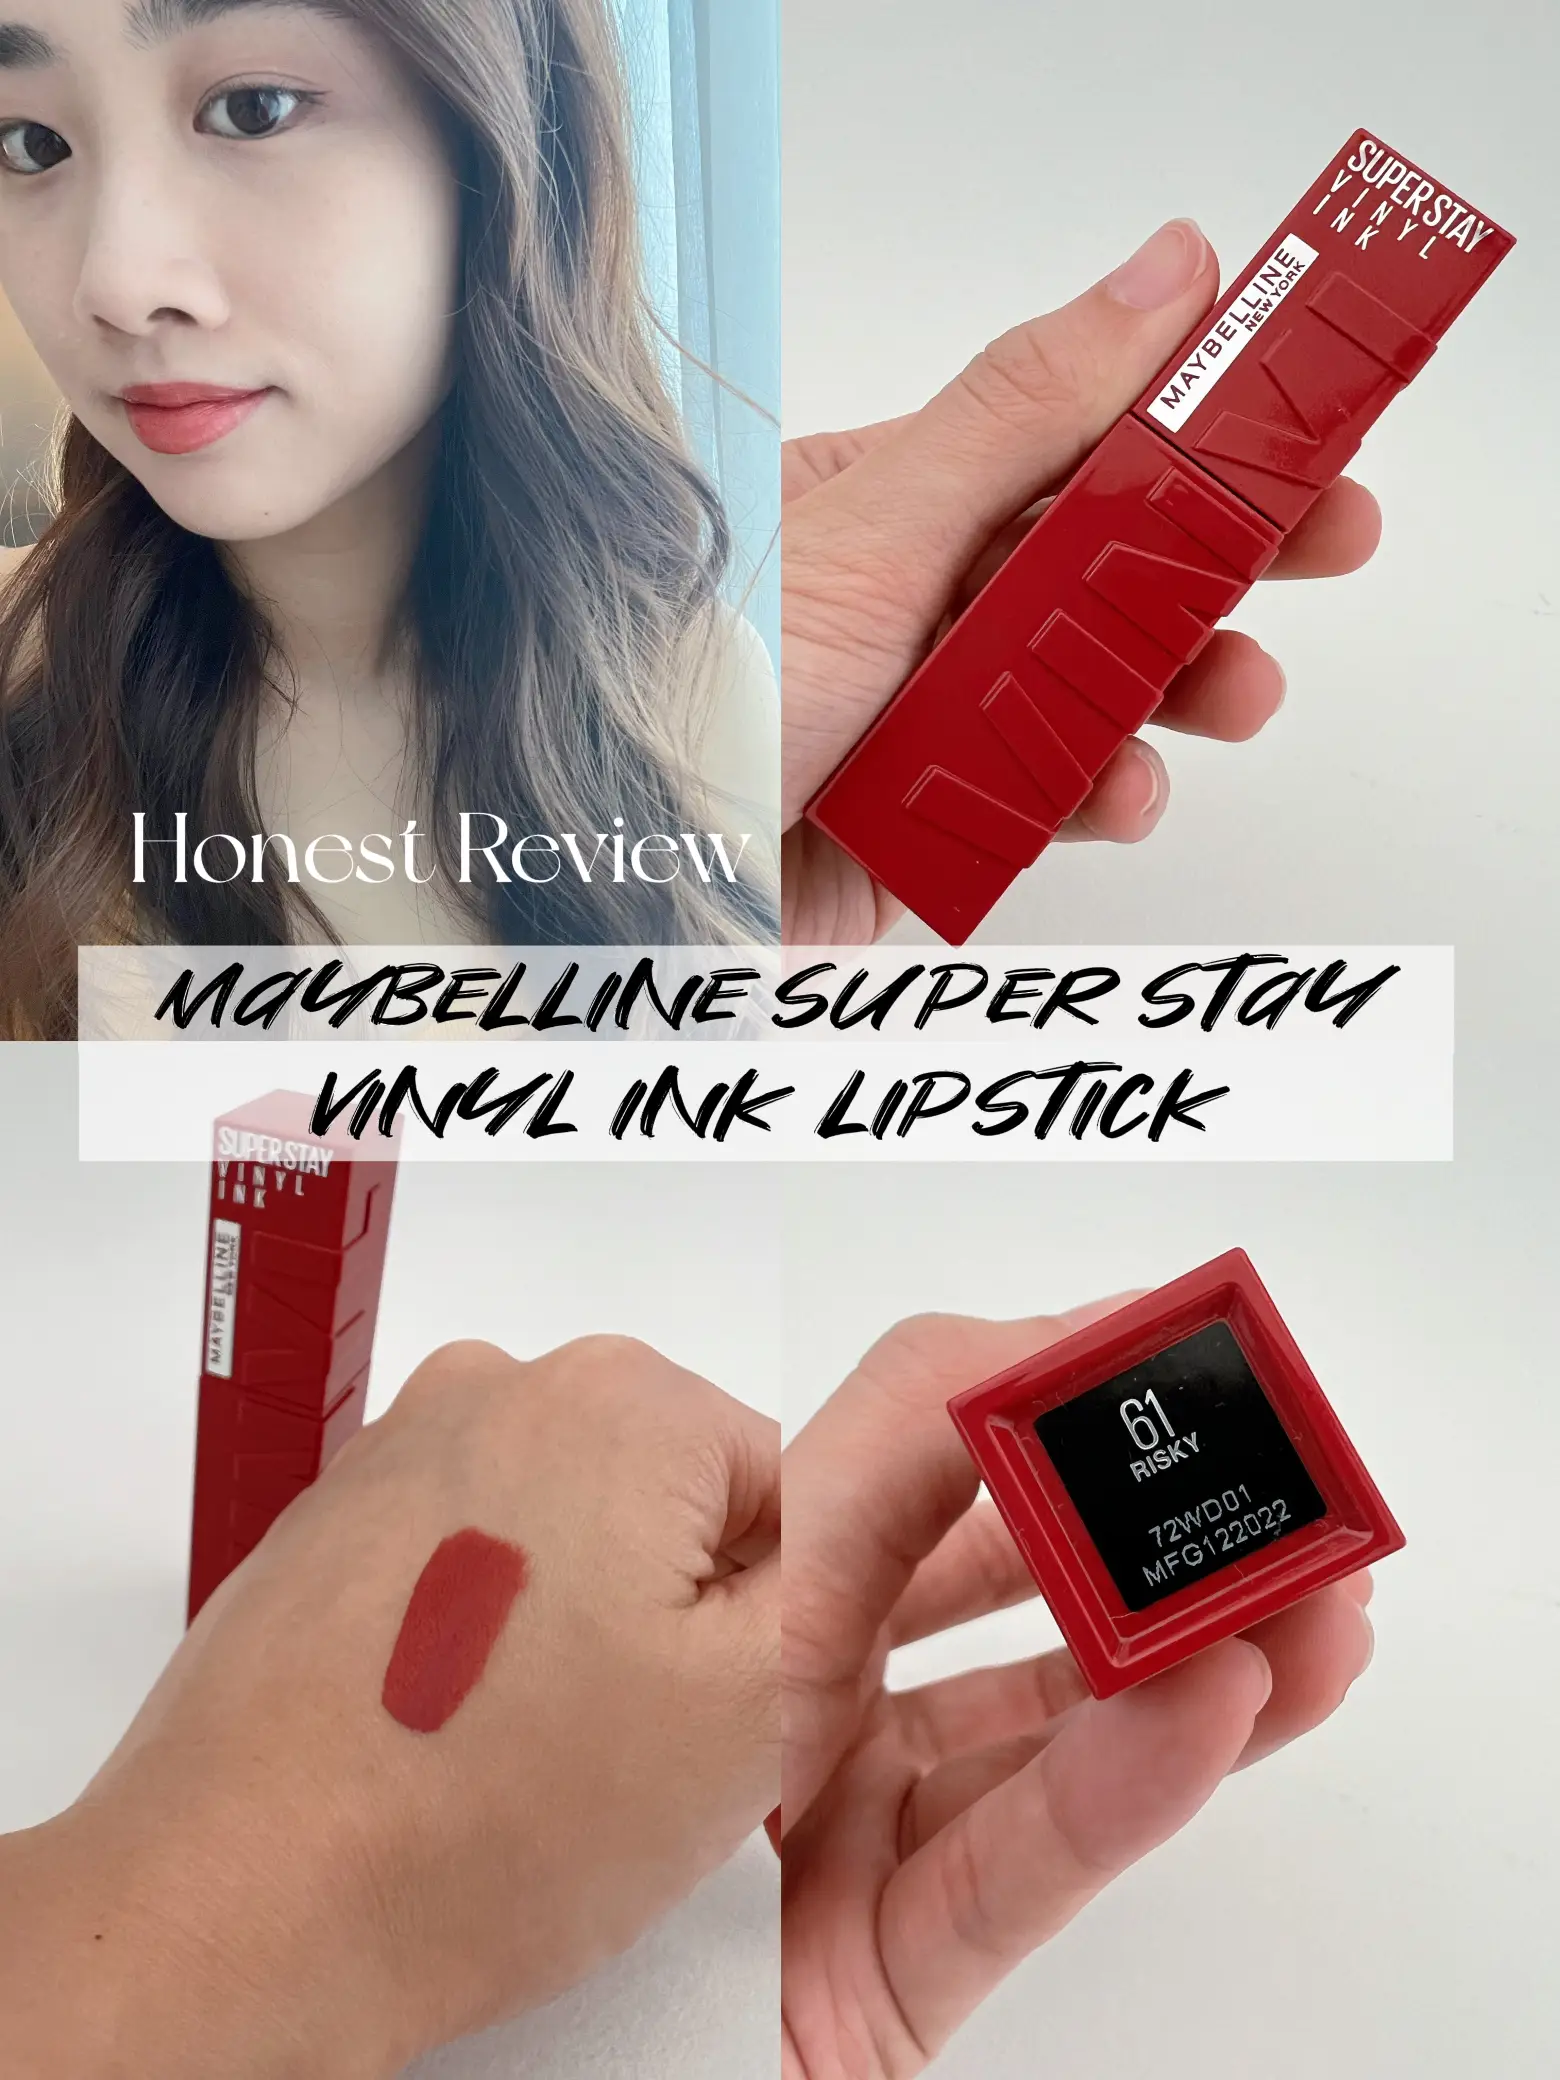 Maybelline Extra Super Stay Vinyl Ink Liquid Lipcolor Review & Swatches